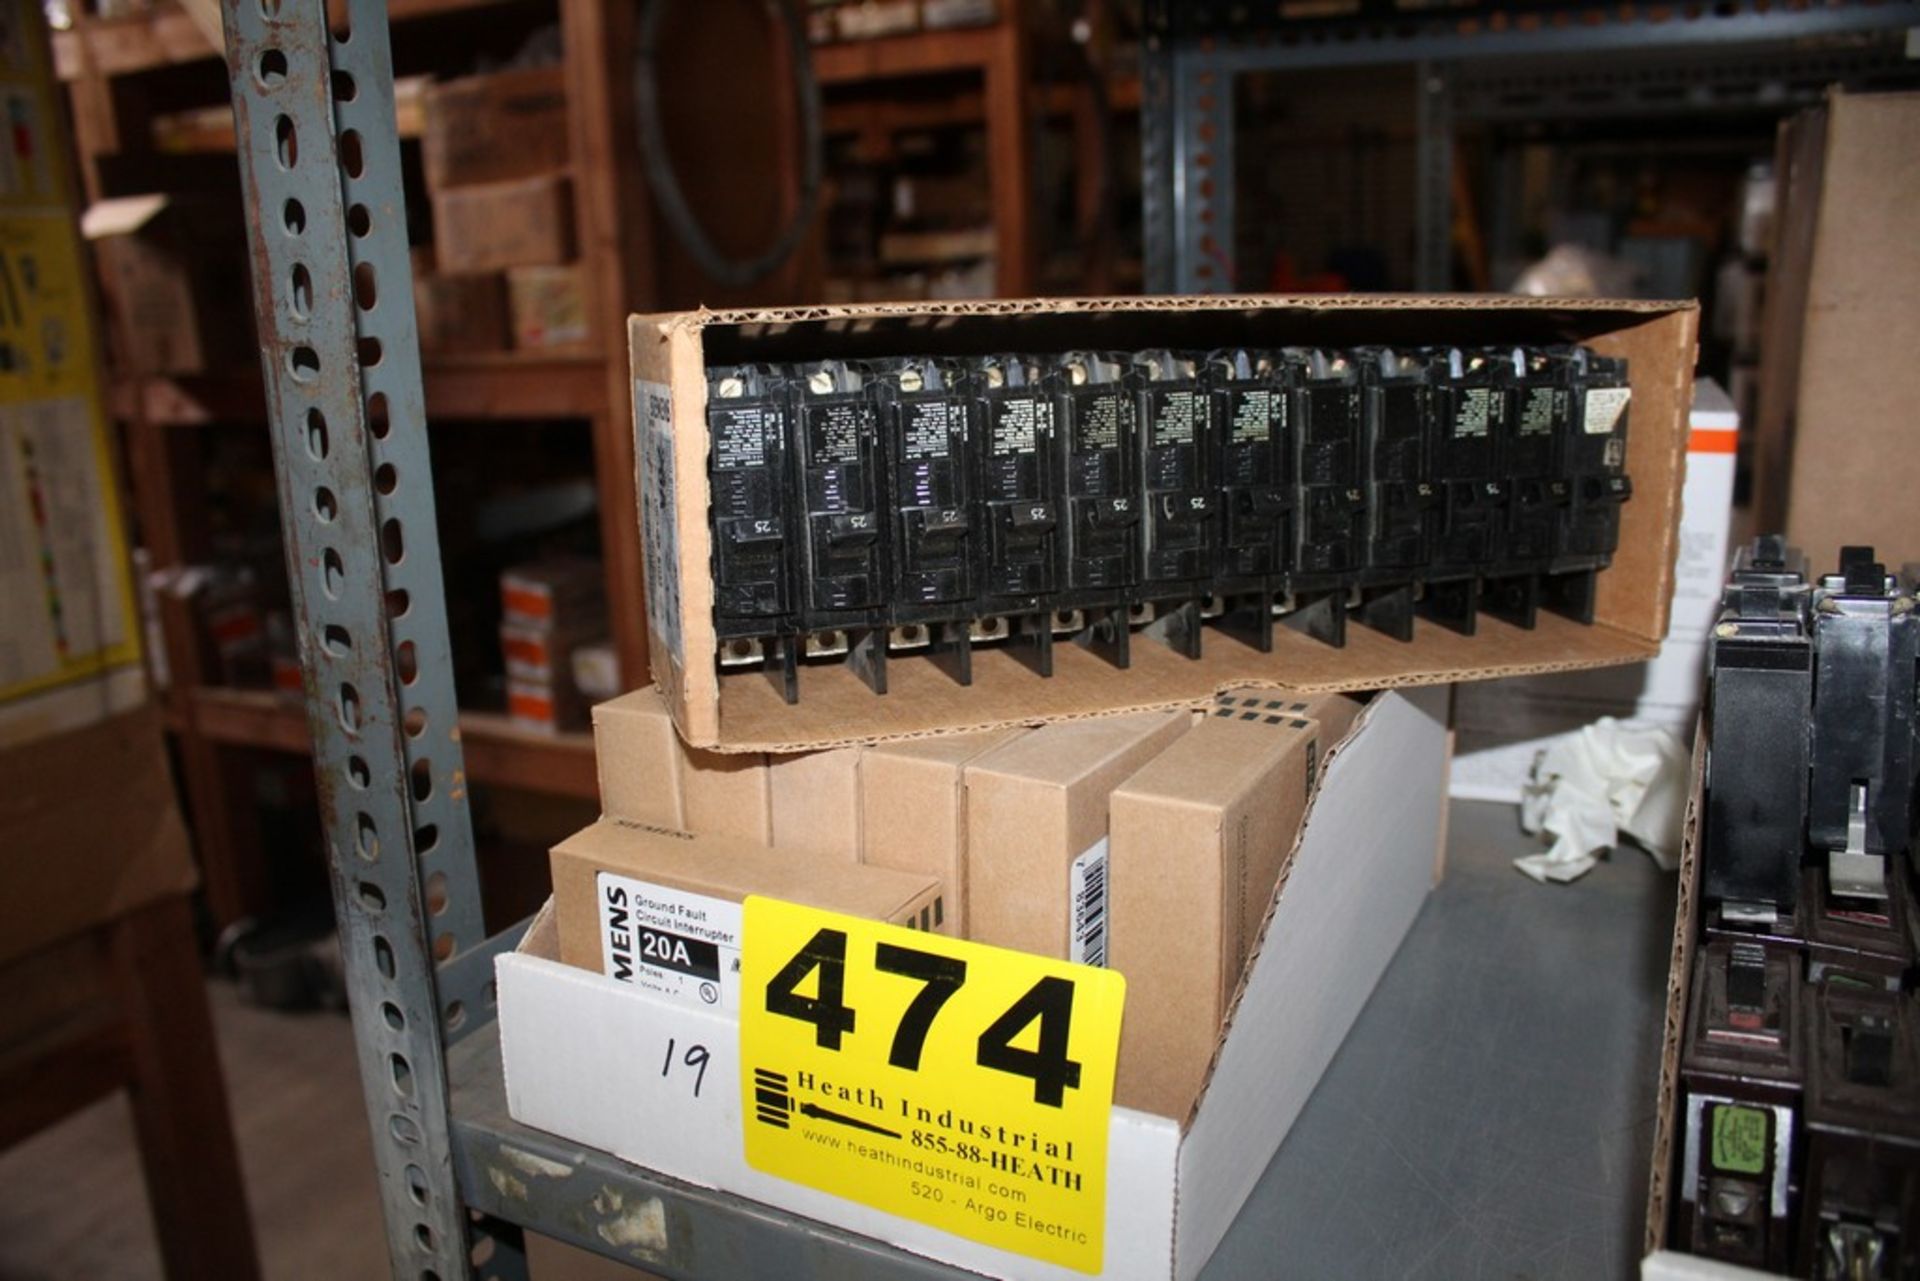 (31) SIEMENS MODEL QF120 20-AMP SINGLE POLE CIRCUIT BREAKERS, APPEAR TO BE NEW